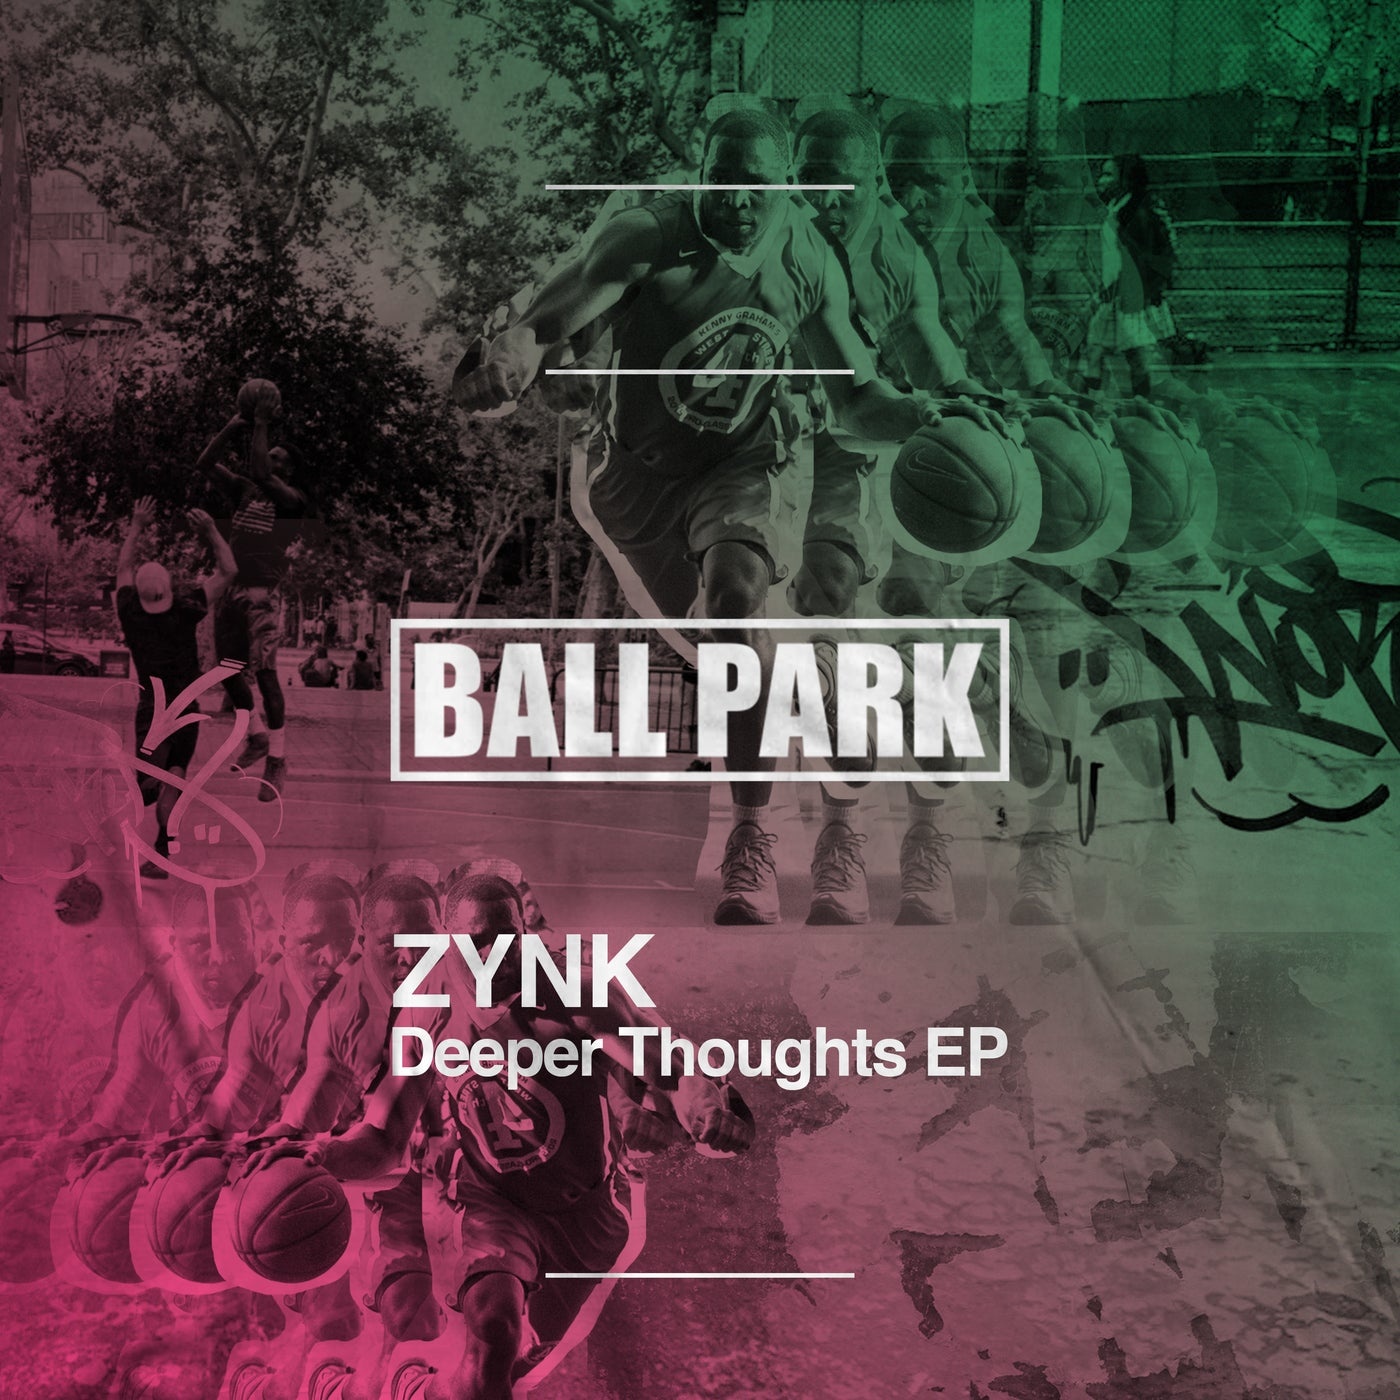 ZYNK - Deeper Thoughts EP [BALLP11]